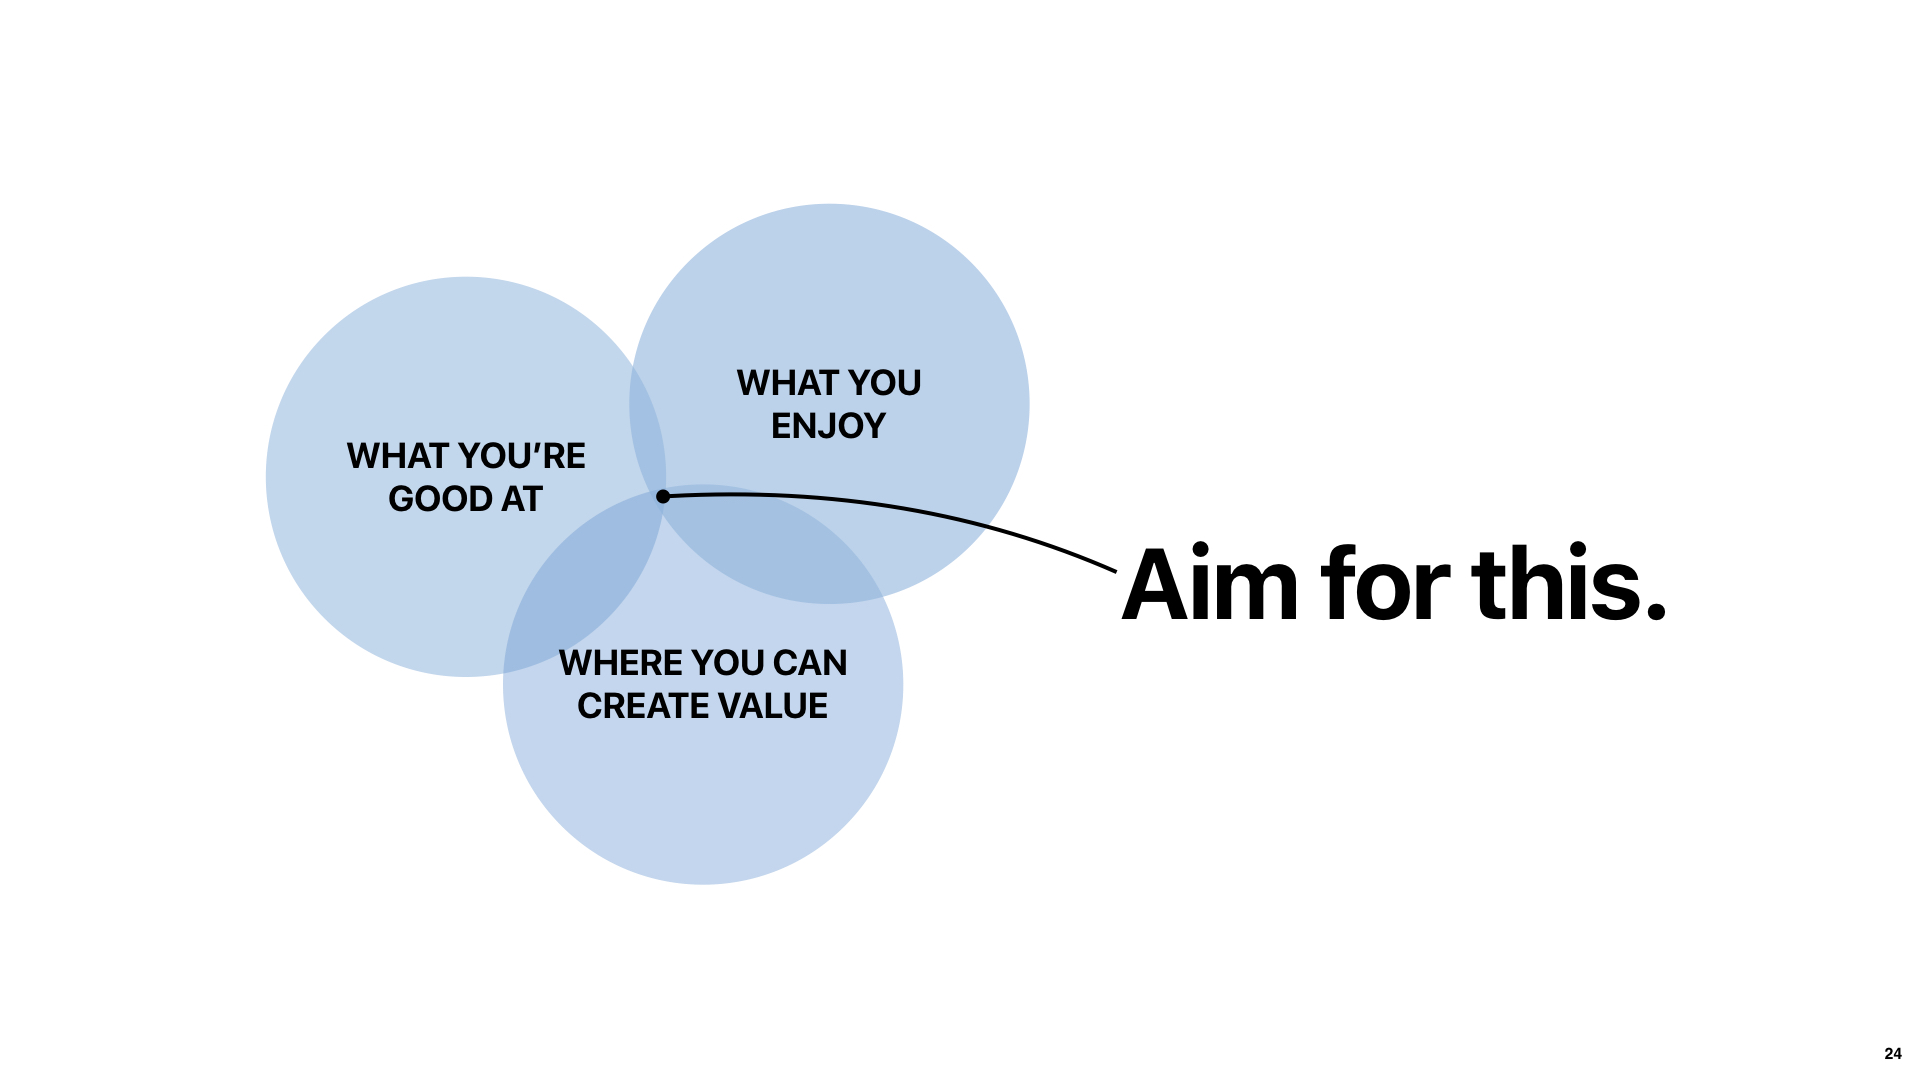 Intersection of what you're good at, what you enjoy and where you can create value